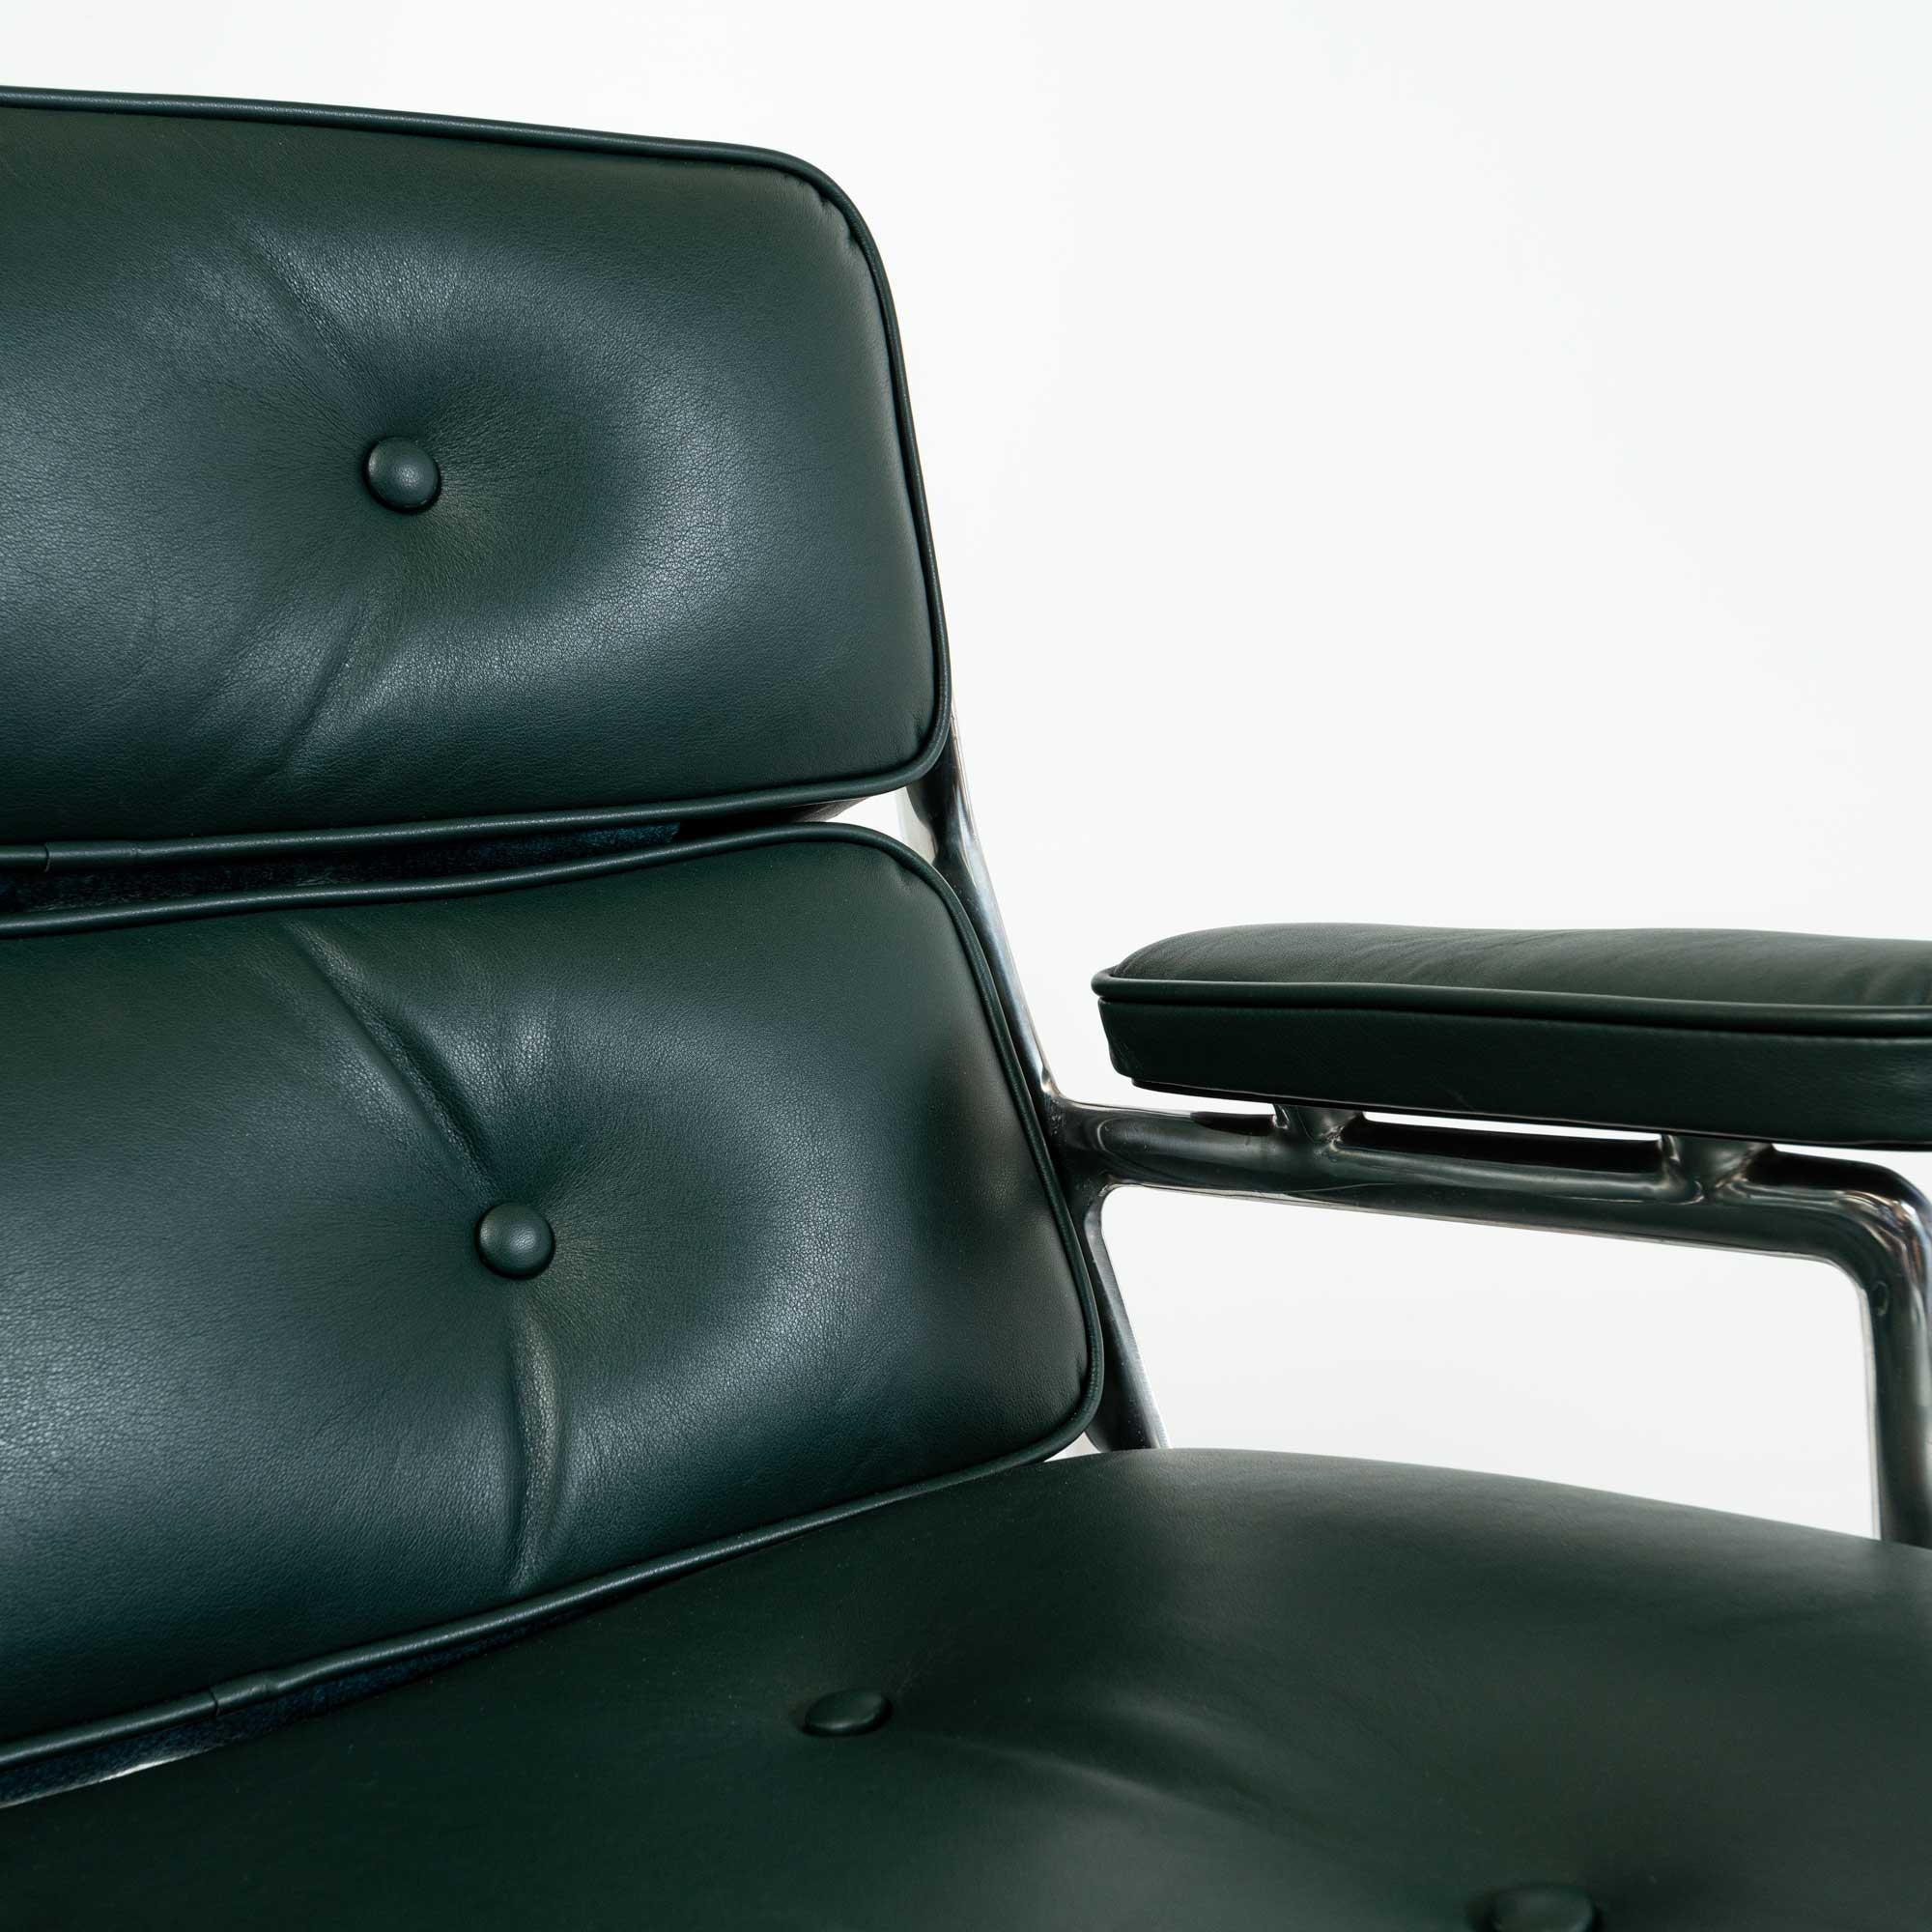 Aluminum Eames Time Life Lobby Lounge Chair ES105/675 in Midnight Green Aniline Leather